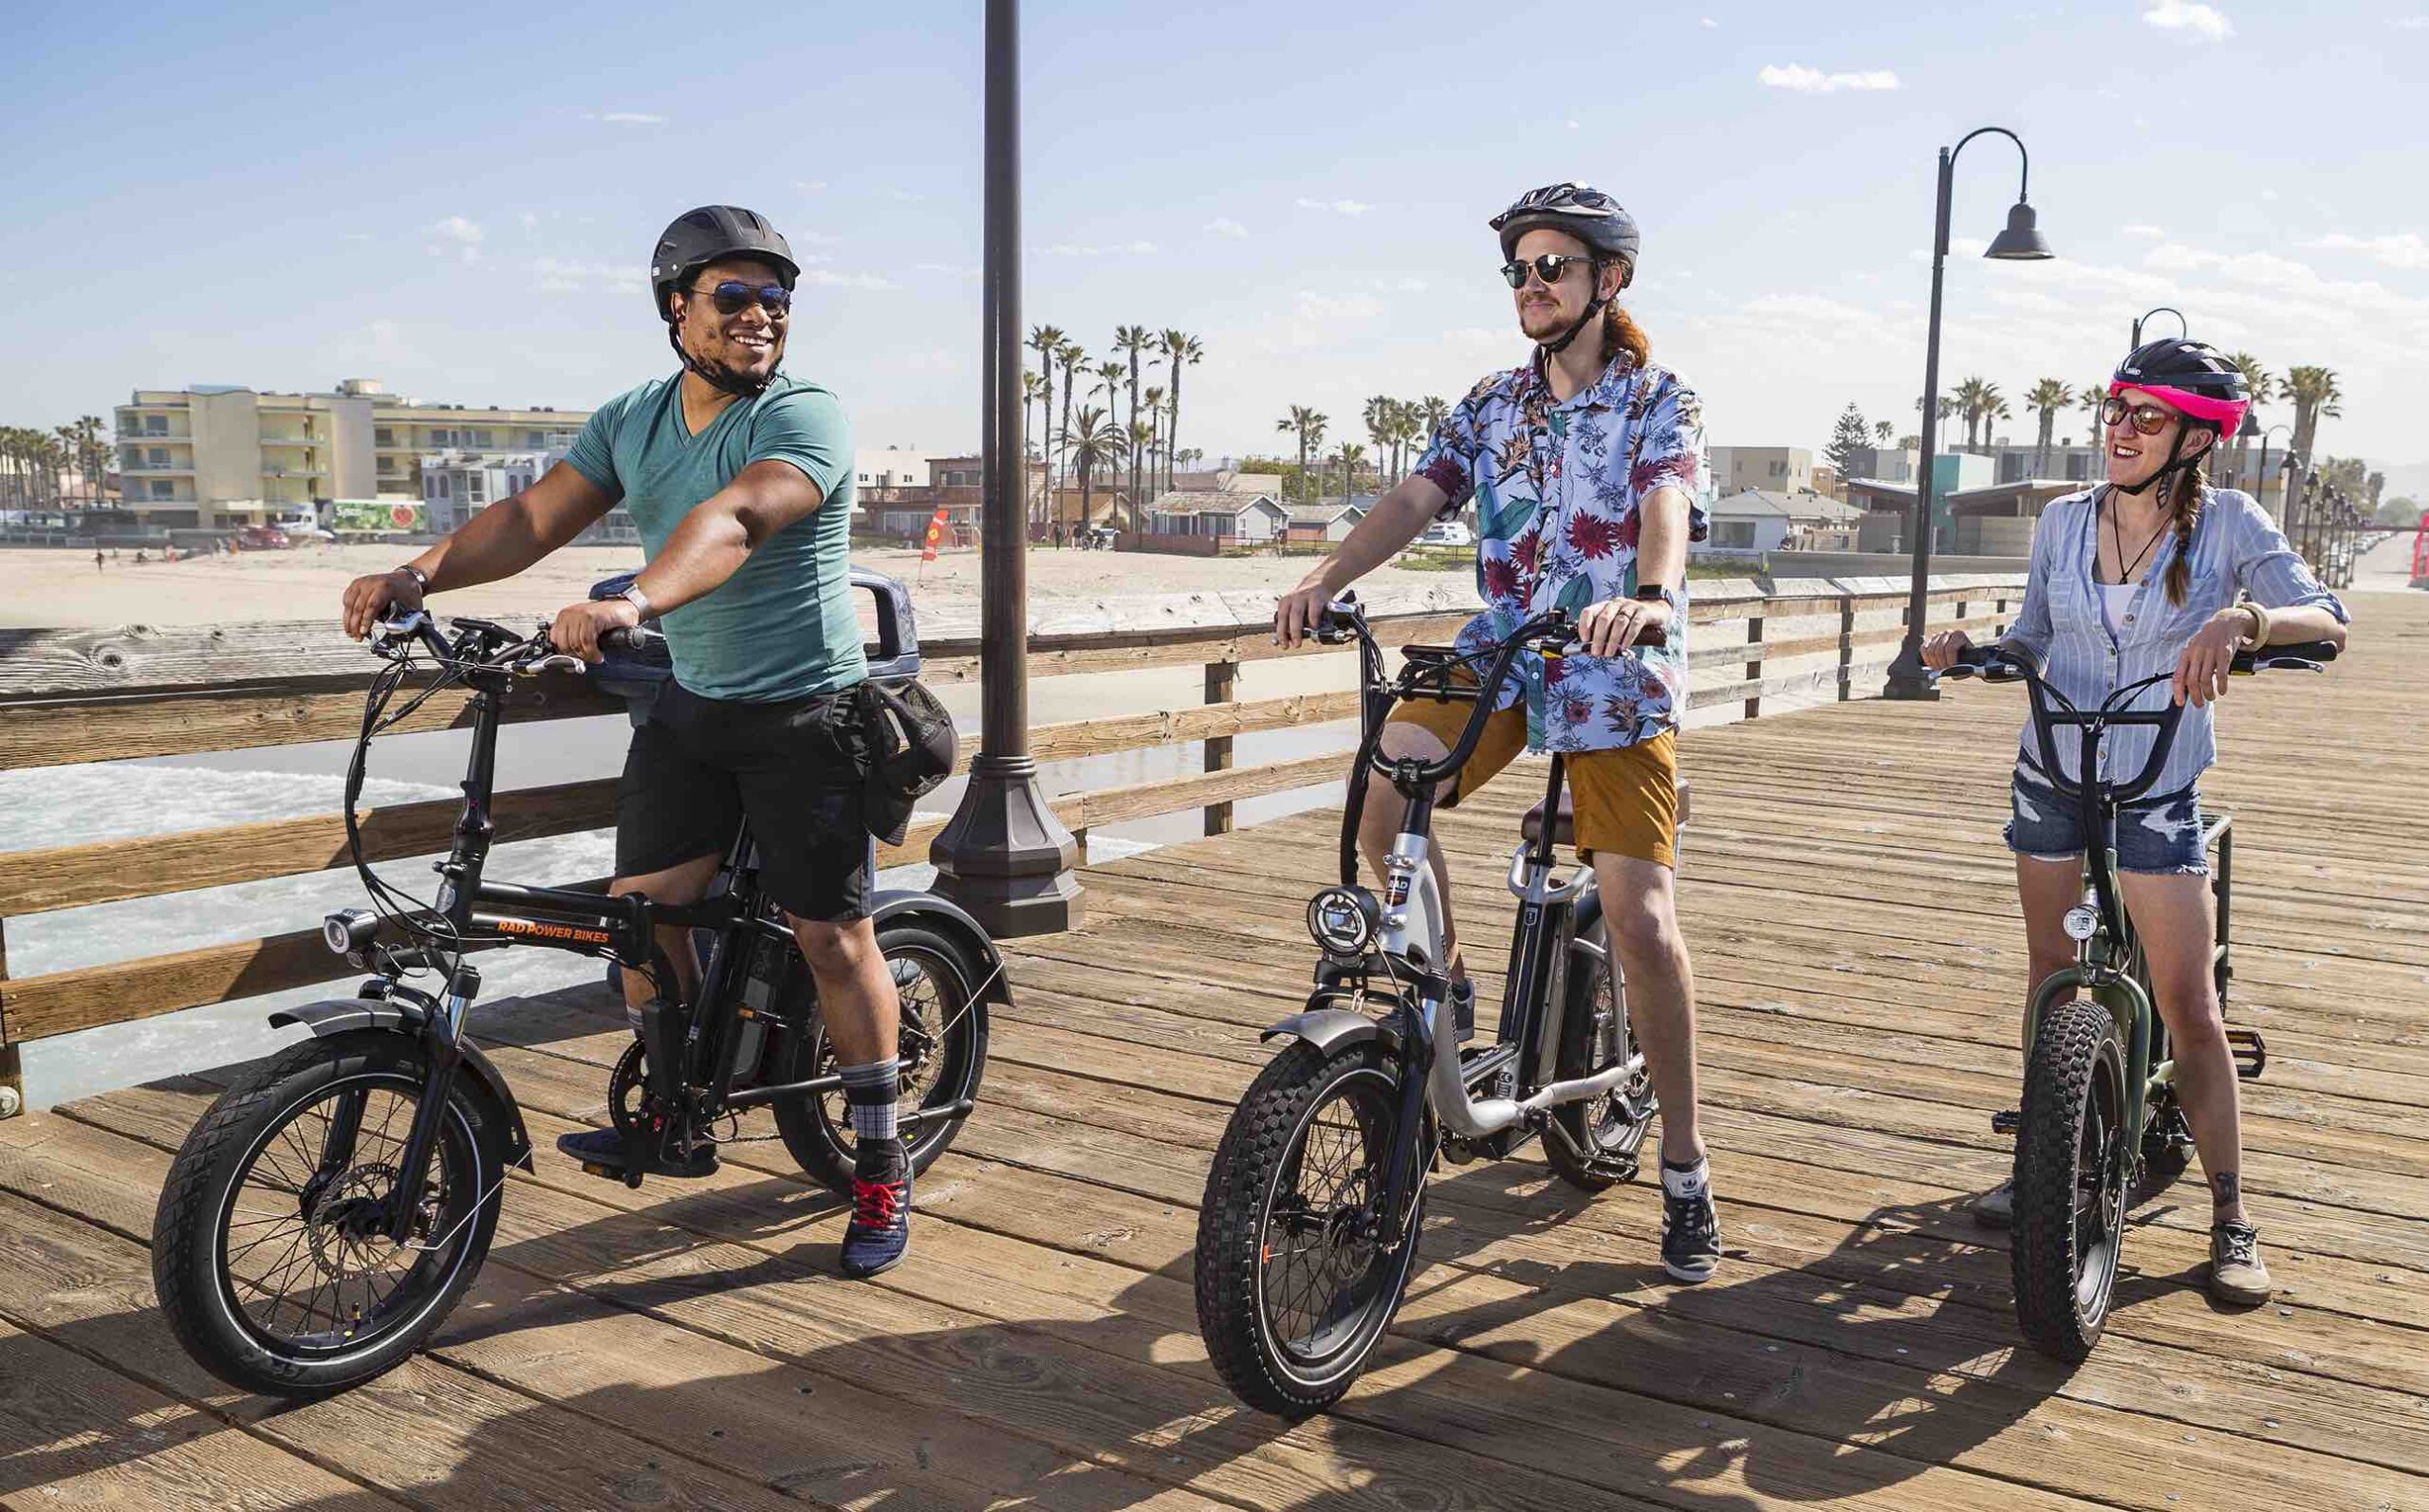 3 friends ride electric bikes down a sunny California boardwalks while laughing.